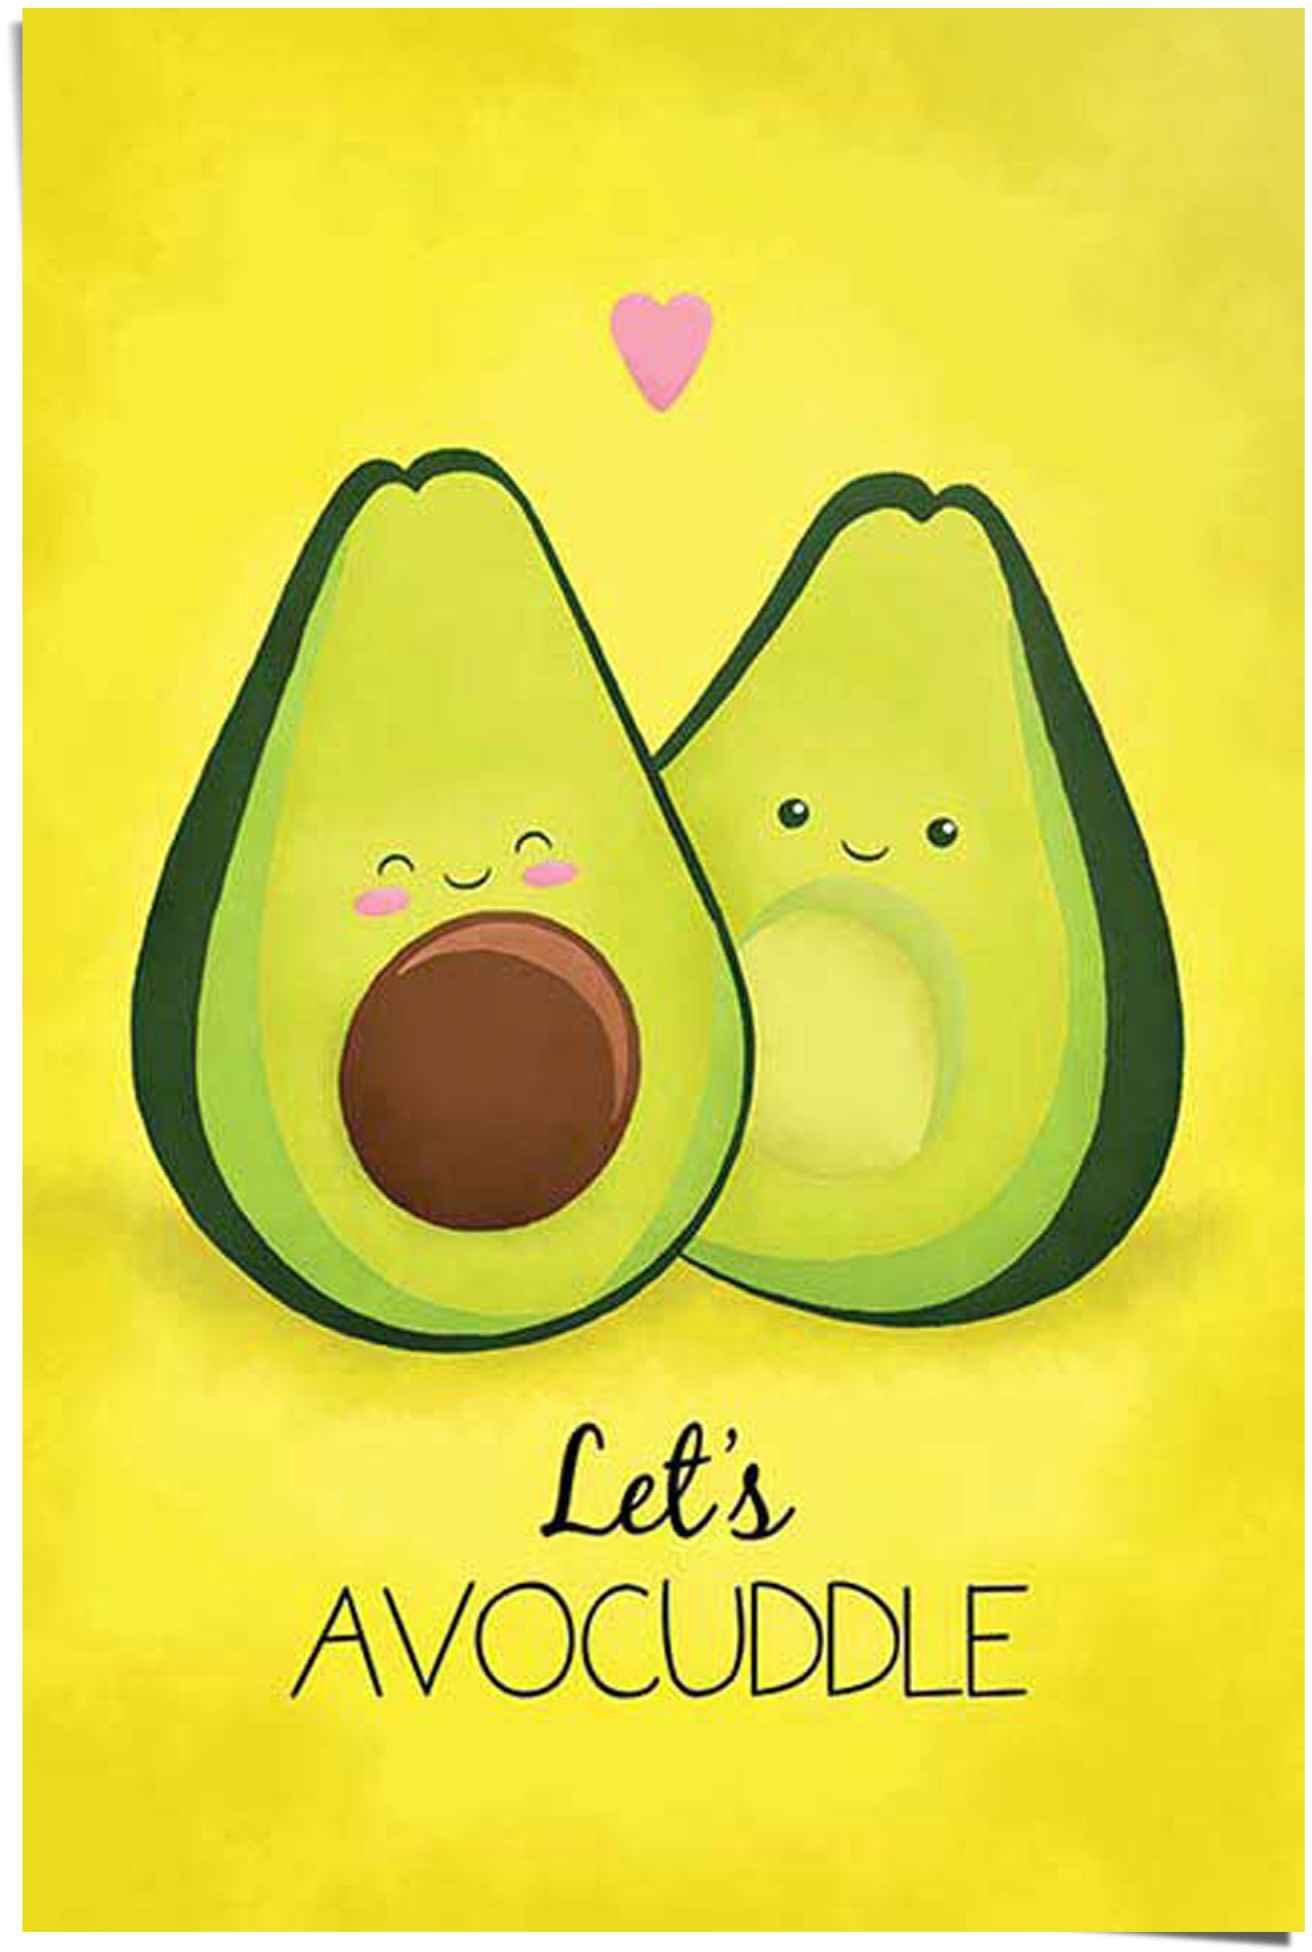 Reinders! Poster Avocado (1 let´s avocuddle, St)